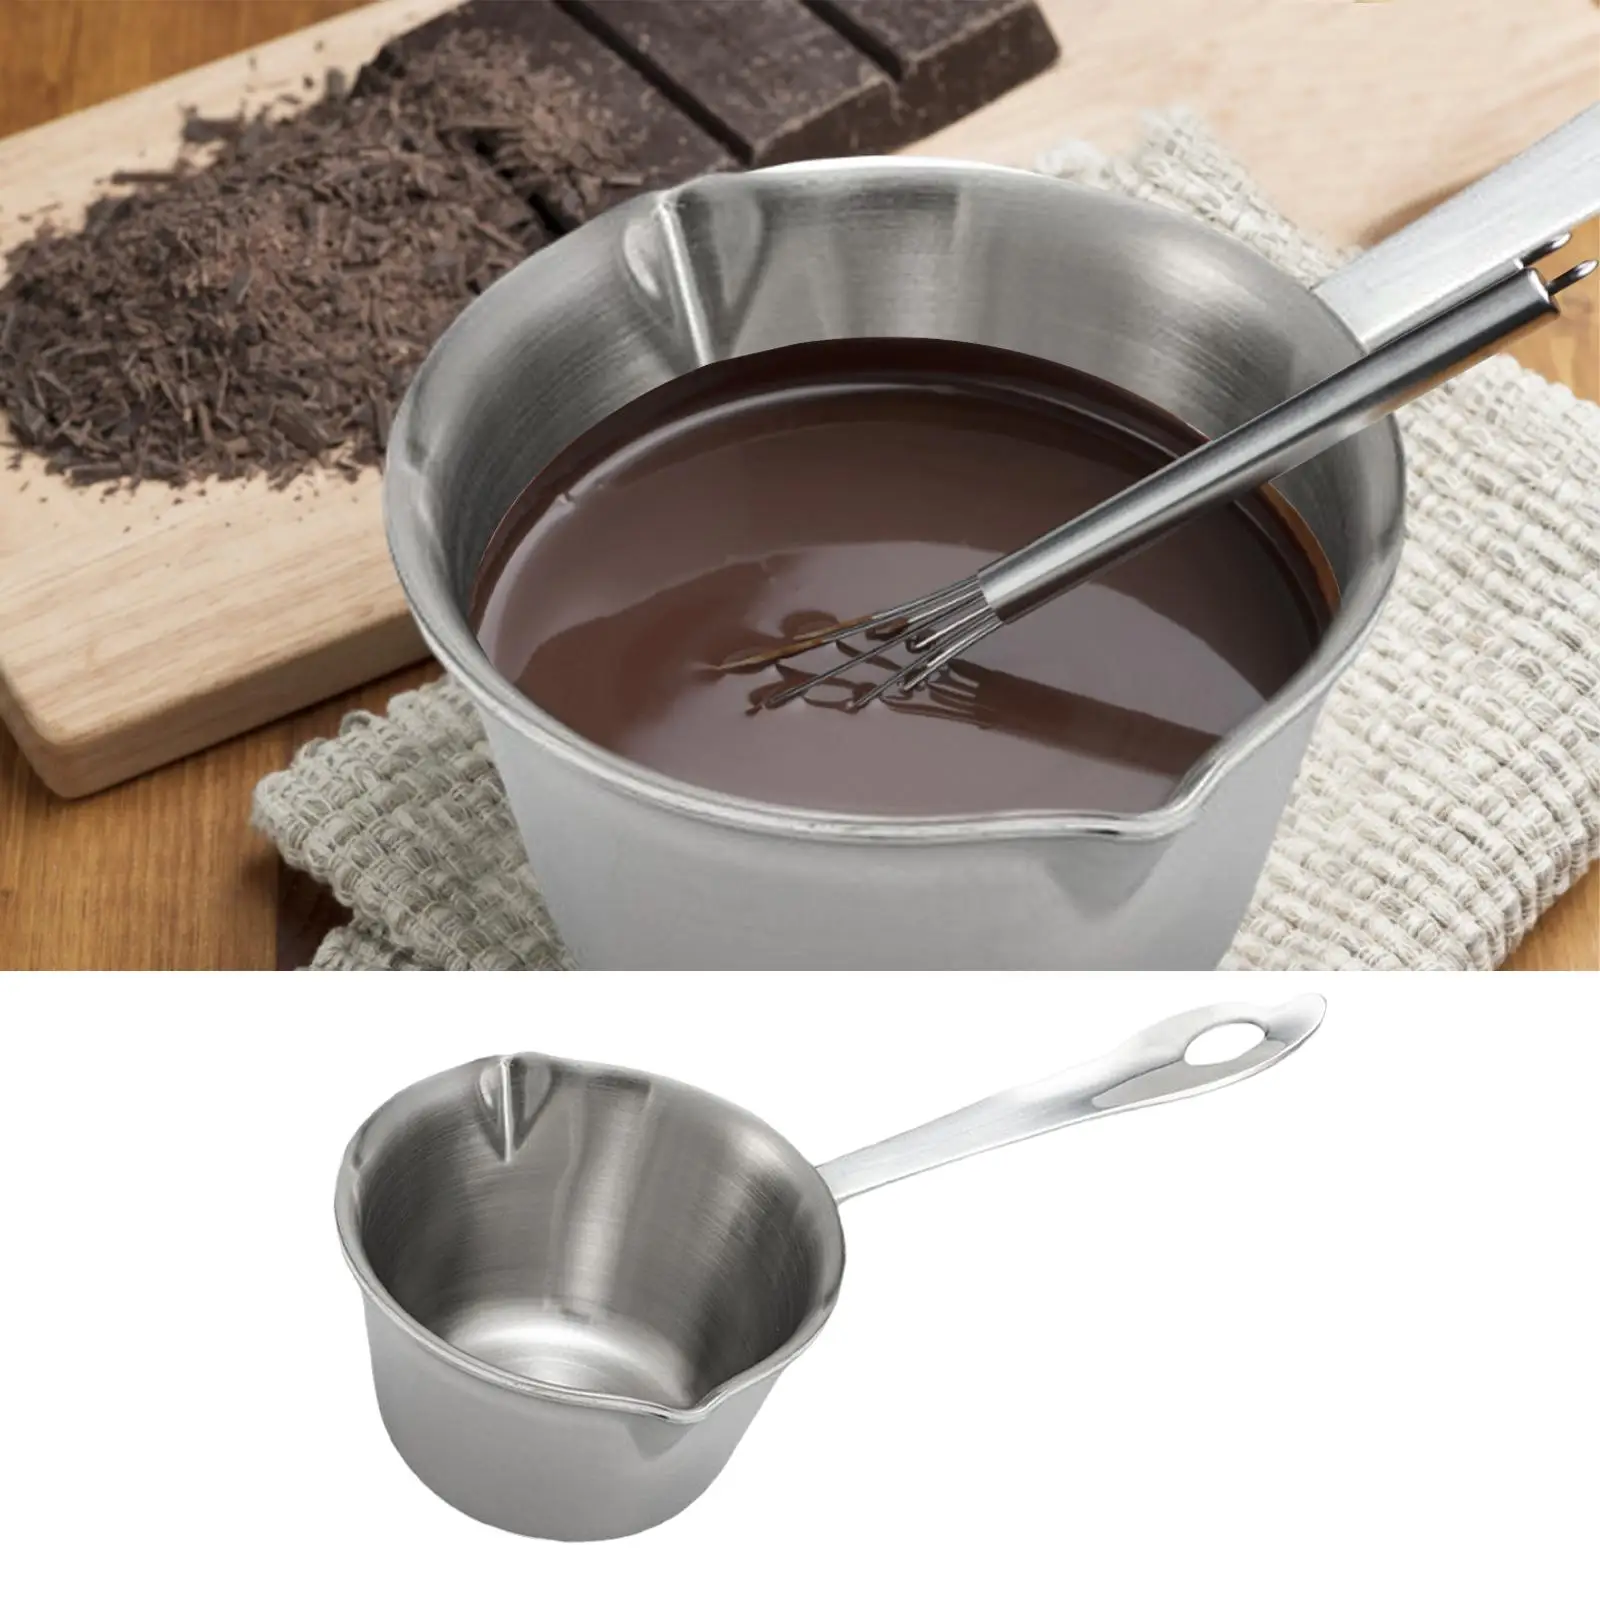 Stainless steel Melting Pot Long Handle Hanging Saucepan Double Spout Coffee Milk Warmer for Breakfast Camping Pasta